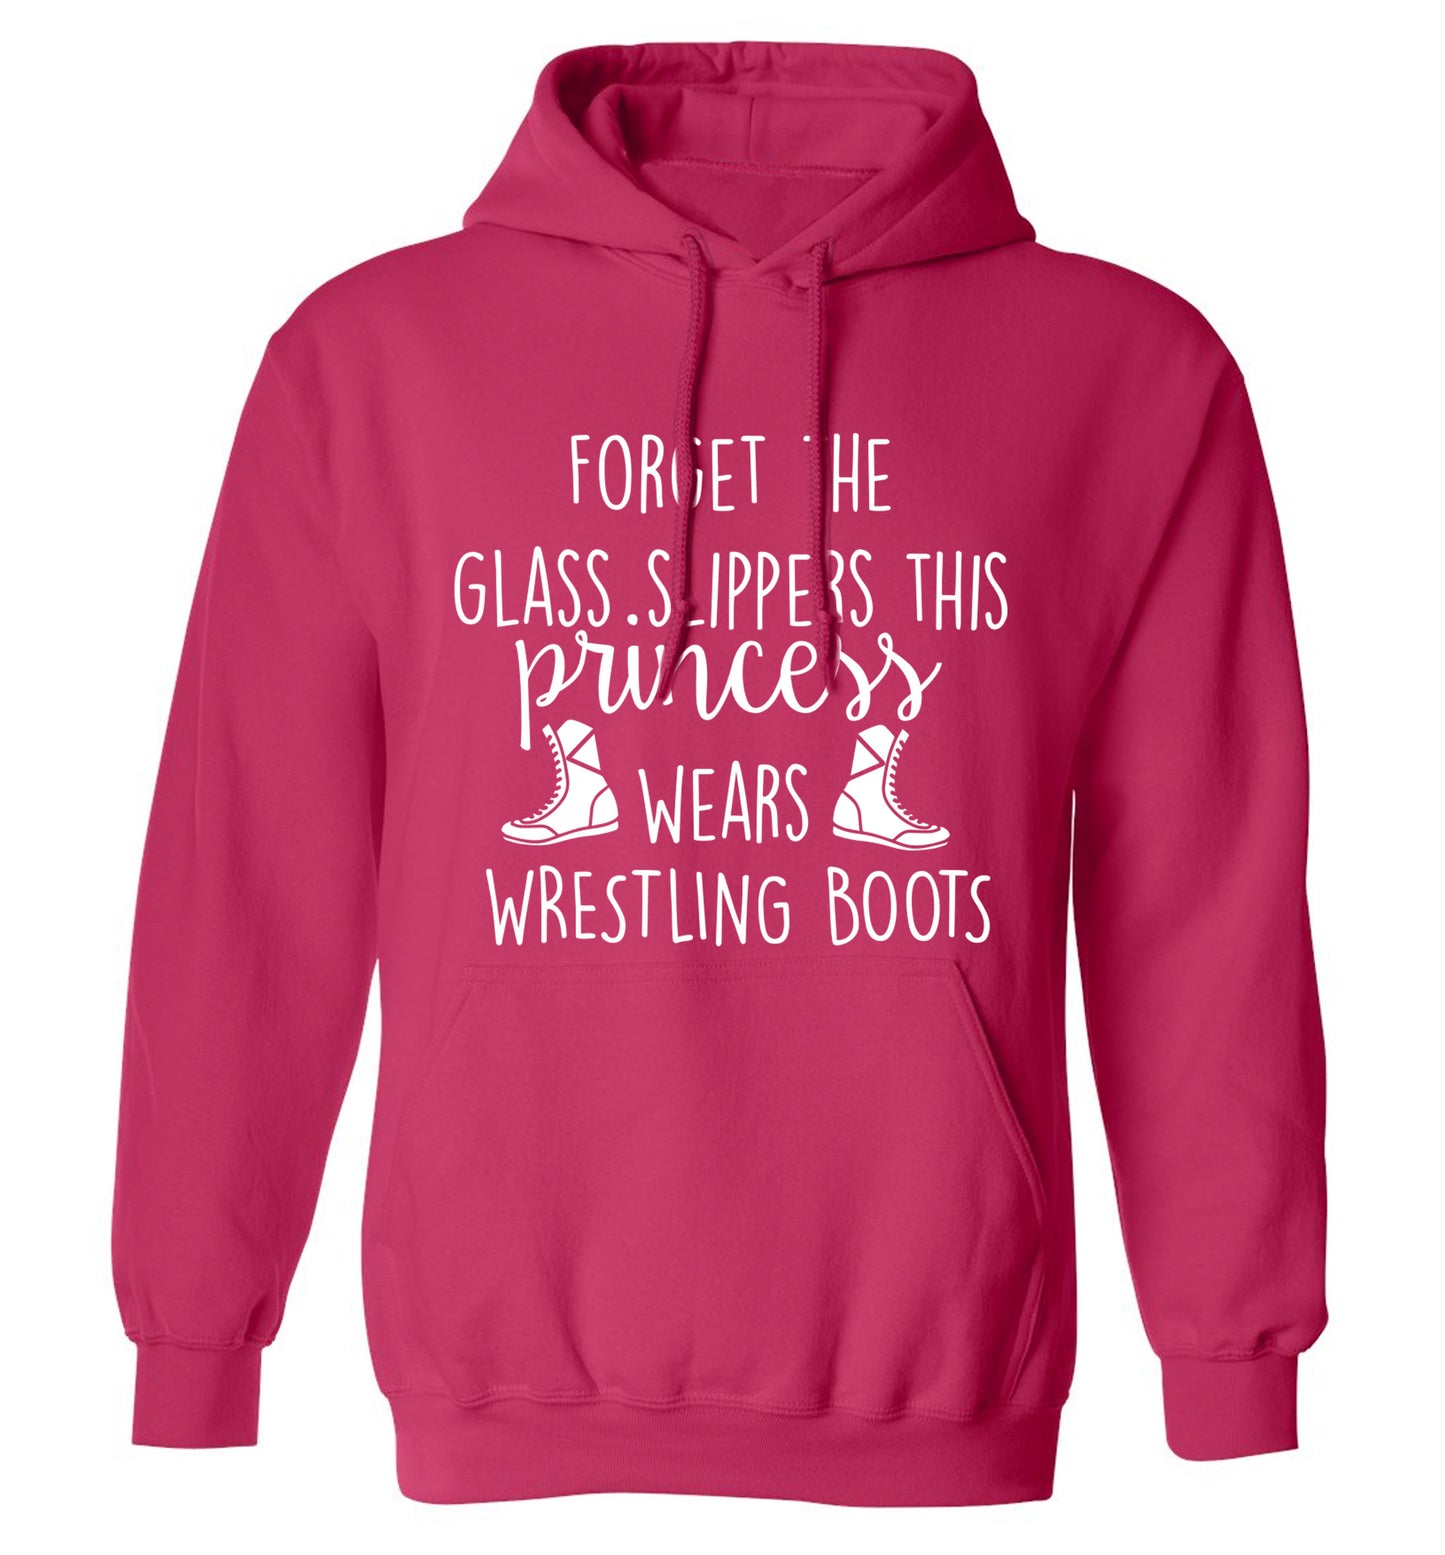 Forget the glass slippers this princess wears wrestling boots adults unisex pink hoodie 2XL